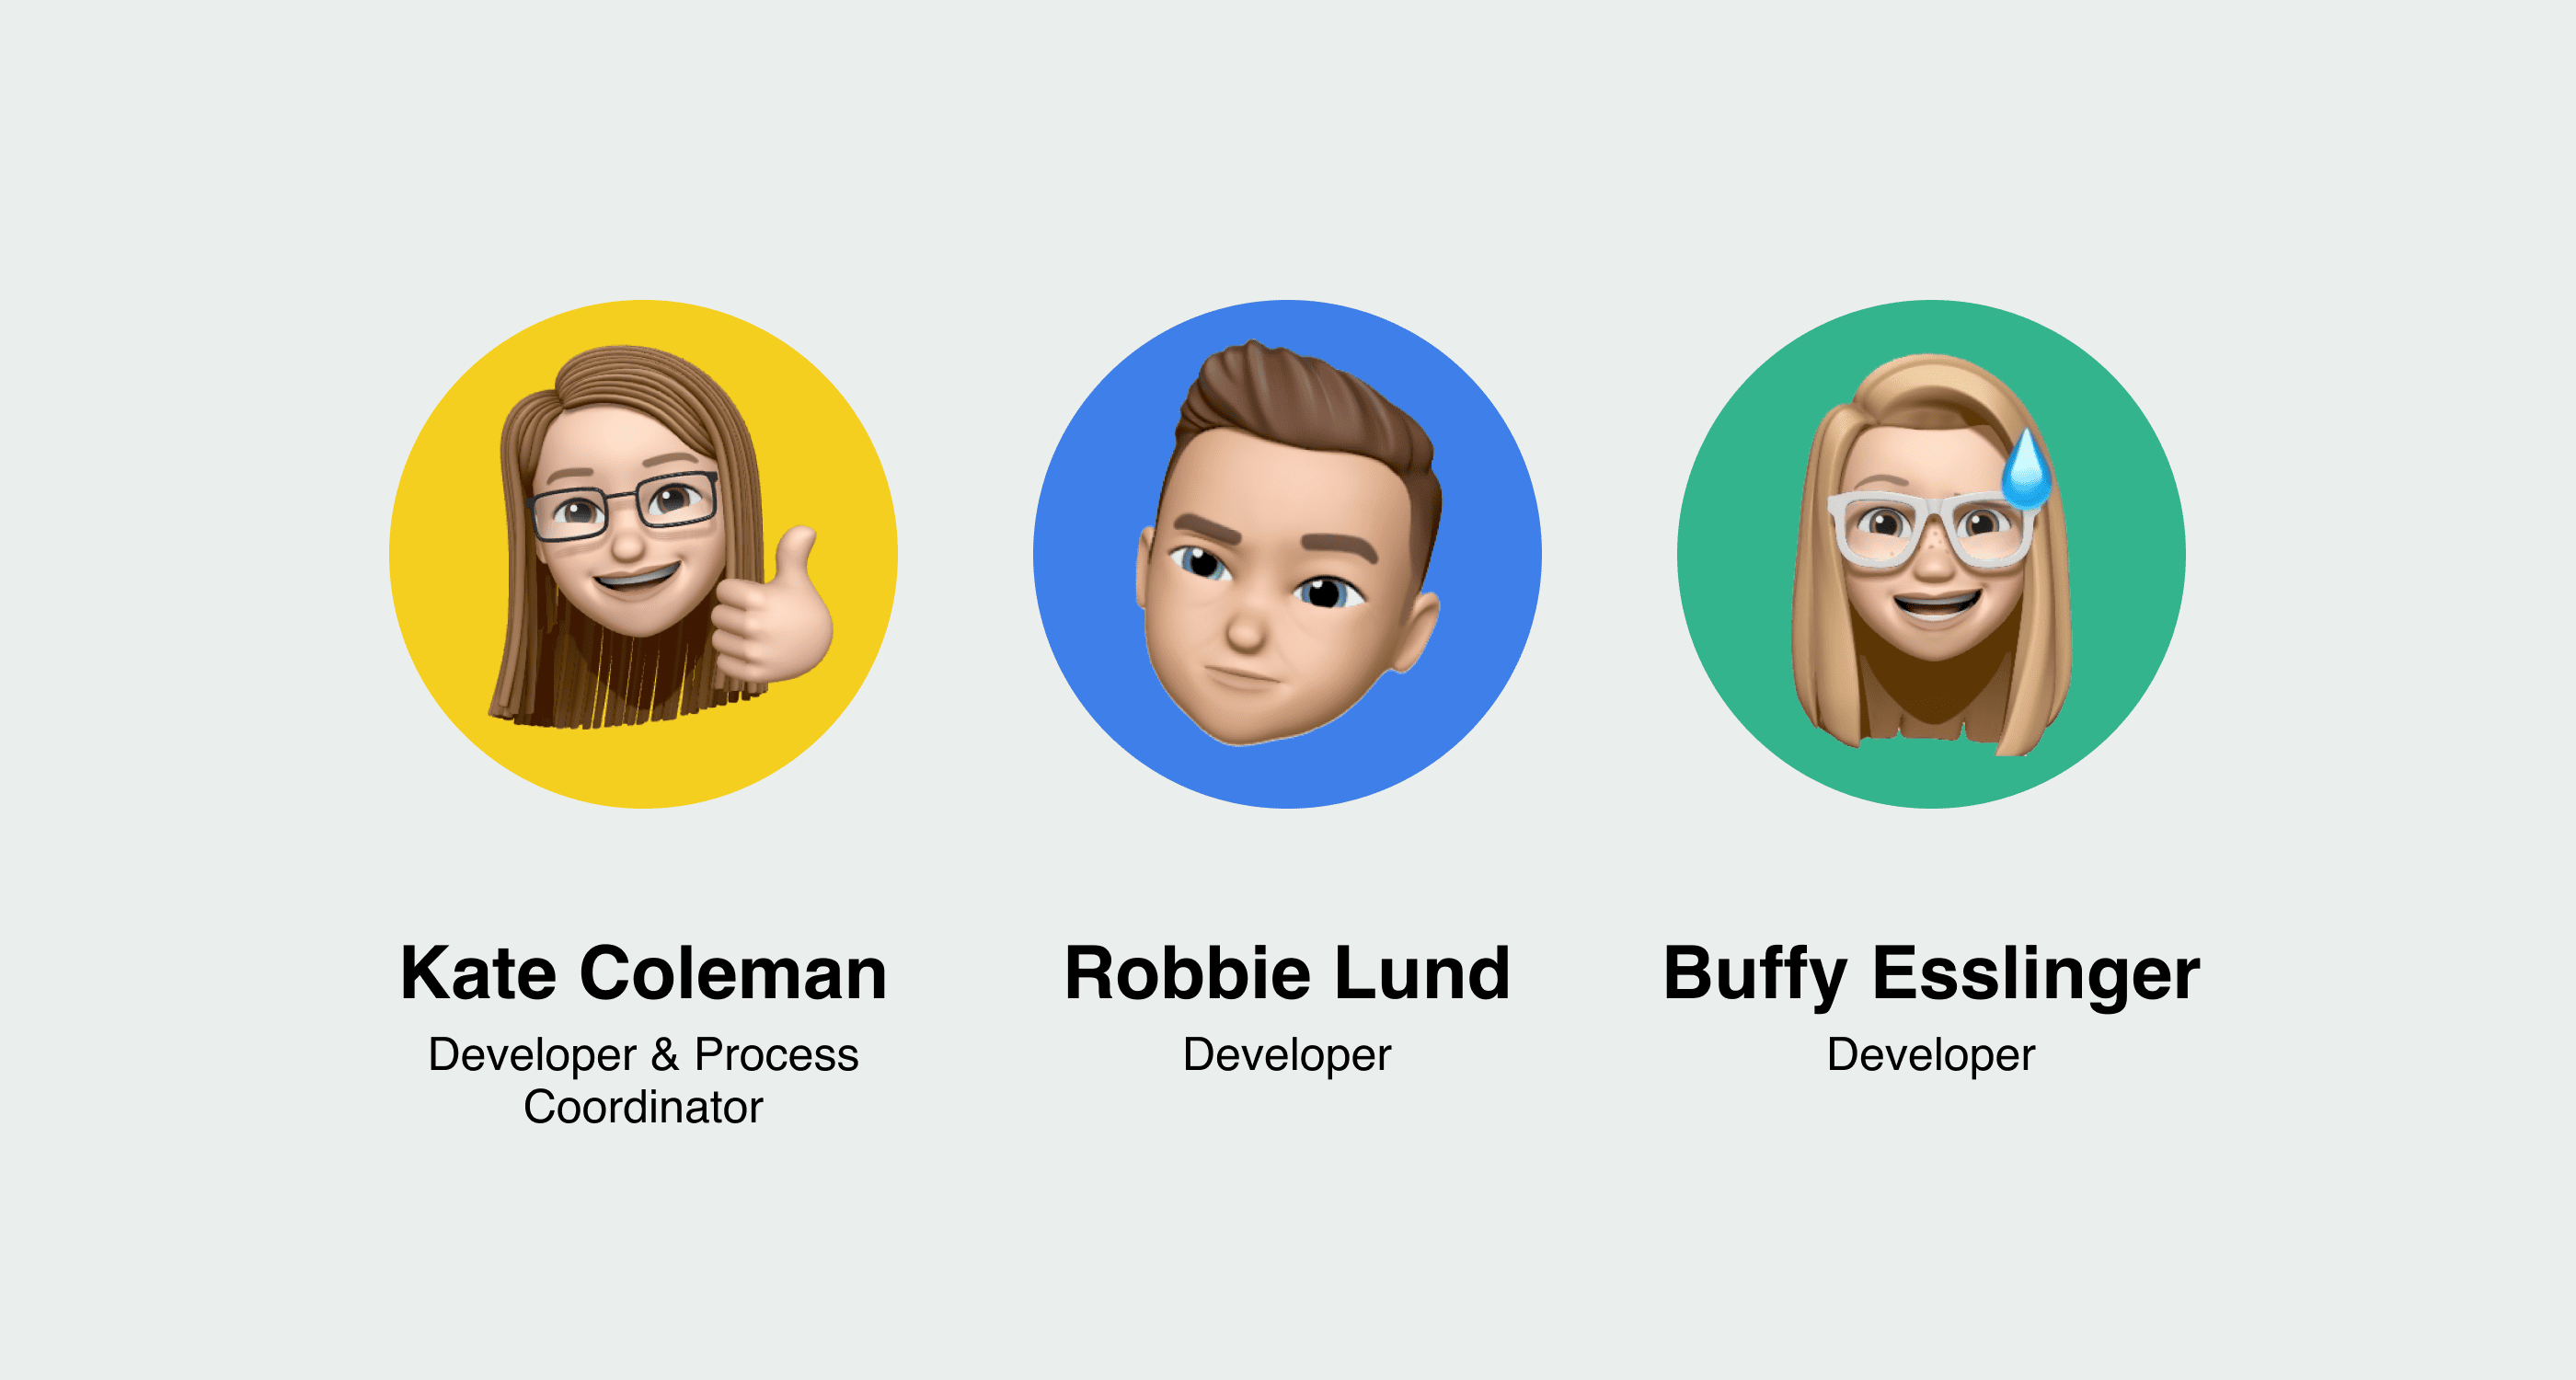 Kate, Robbie, and Buffy's memojis sit on colorful circles with their name and job title beneath.